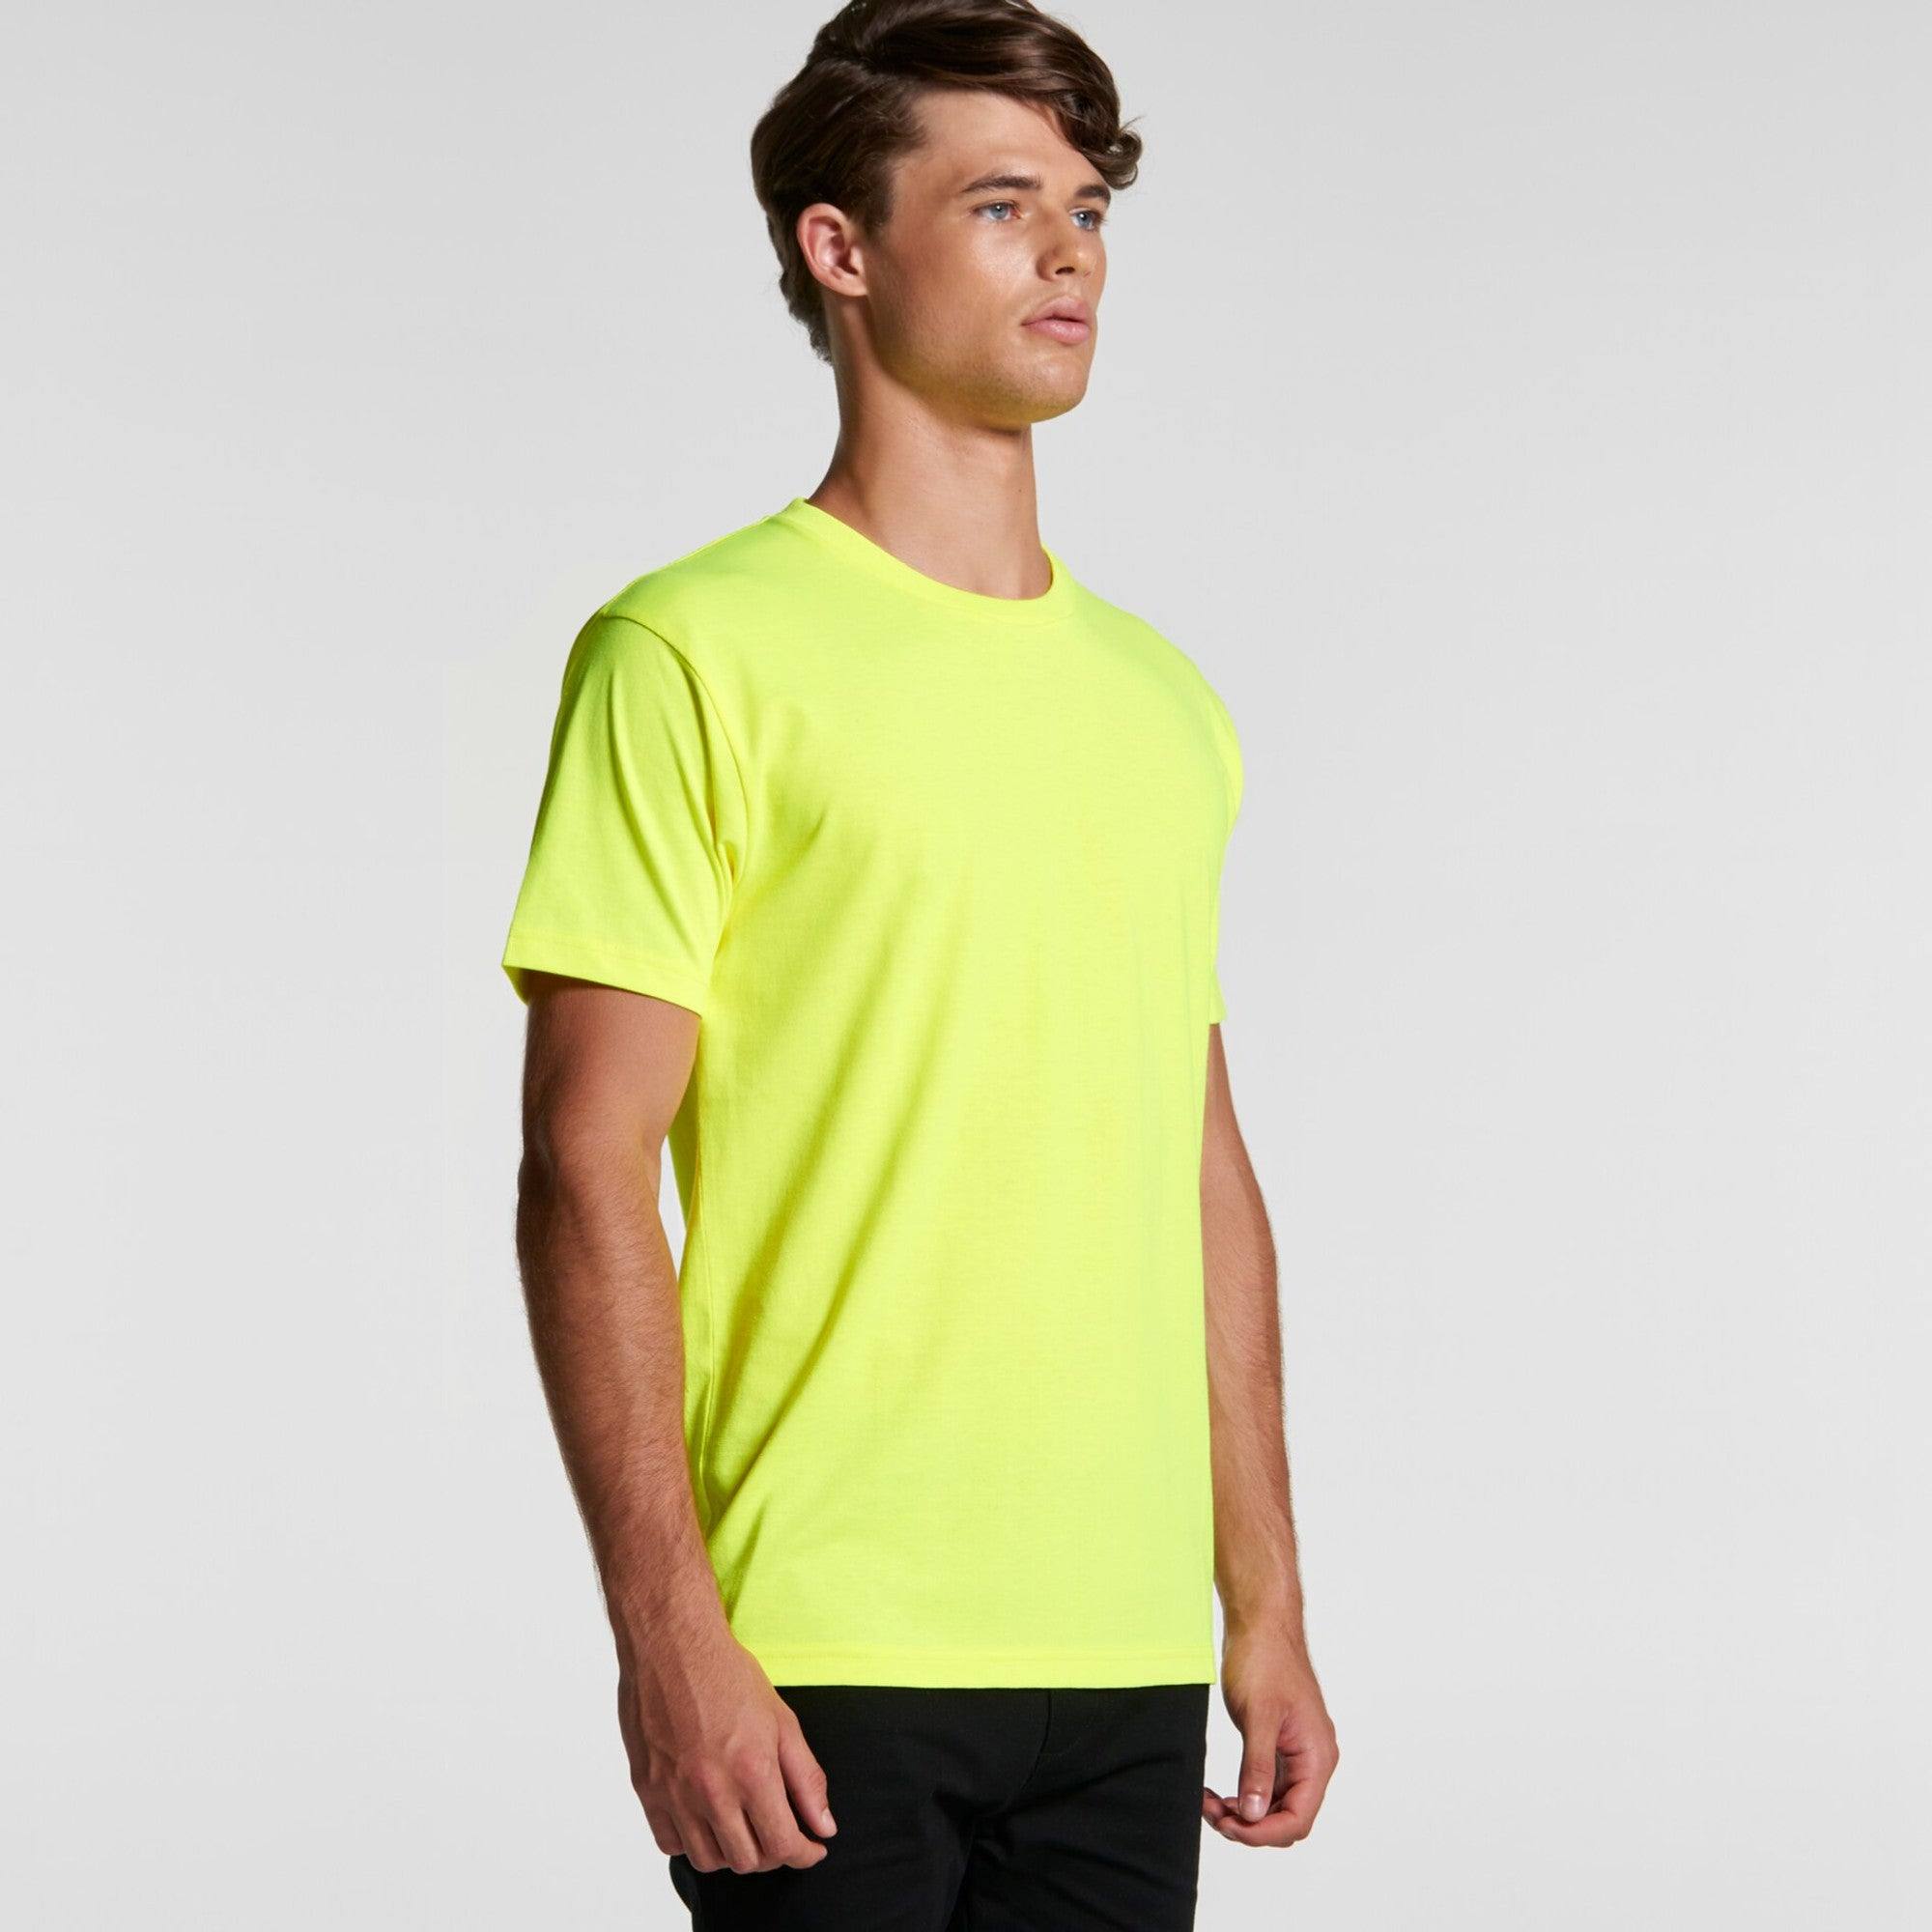 Block Tee (Safety Colours) 5050F - Printibly